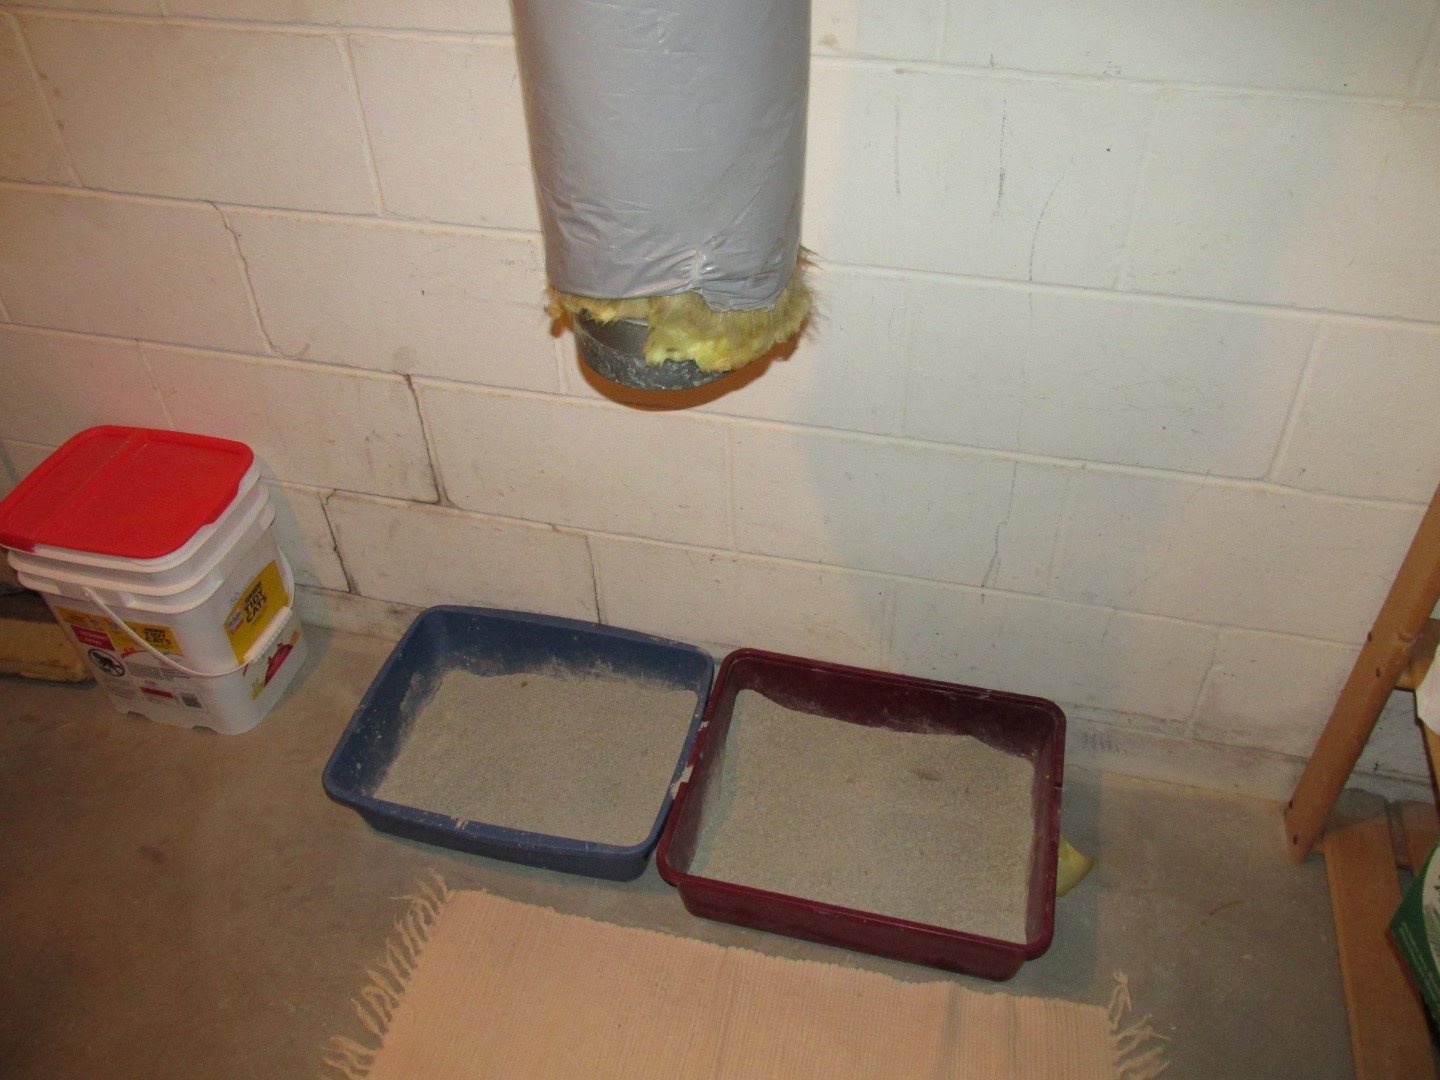 combustion air duct above litter box